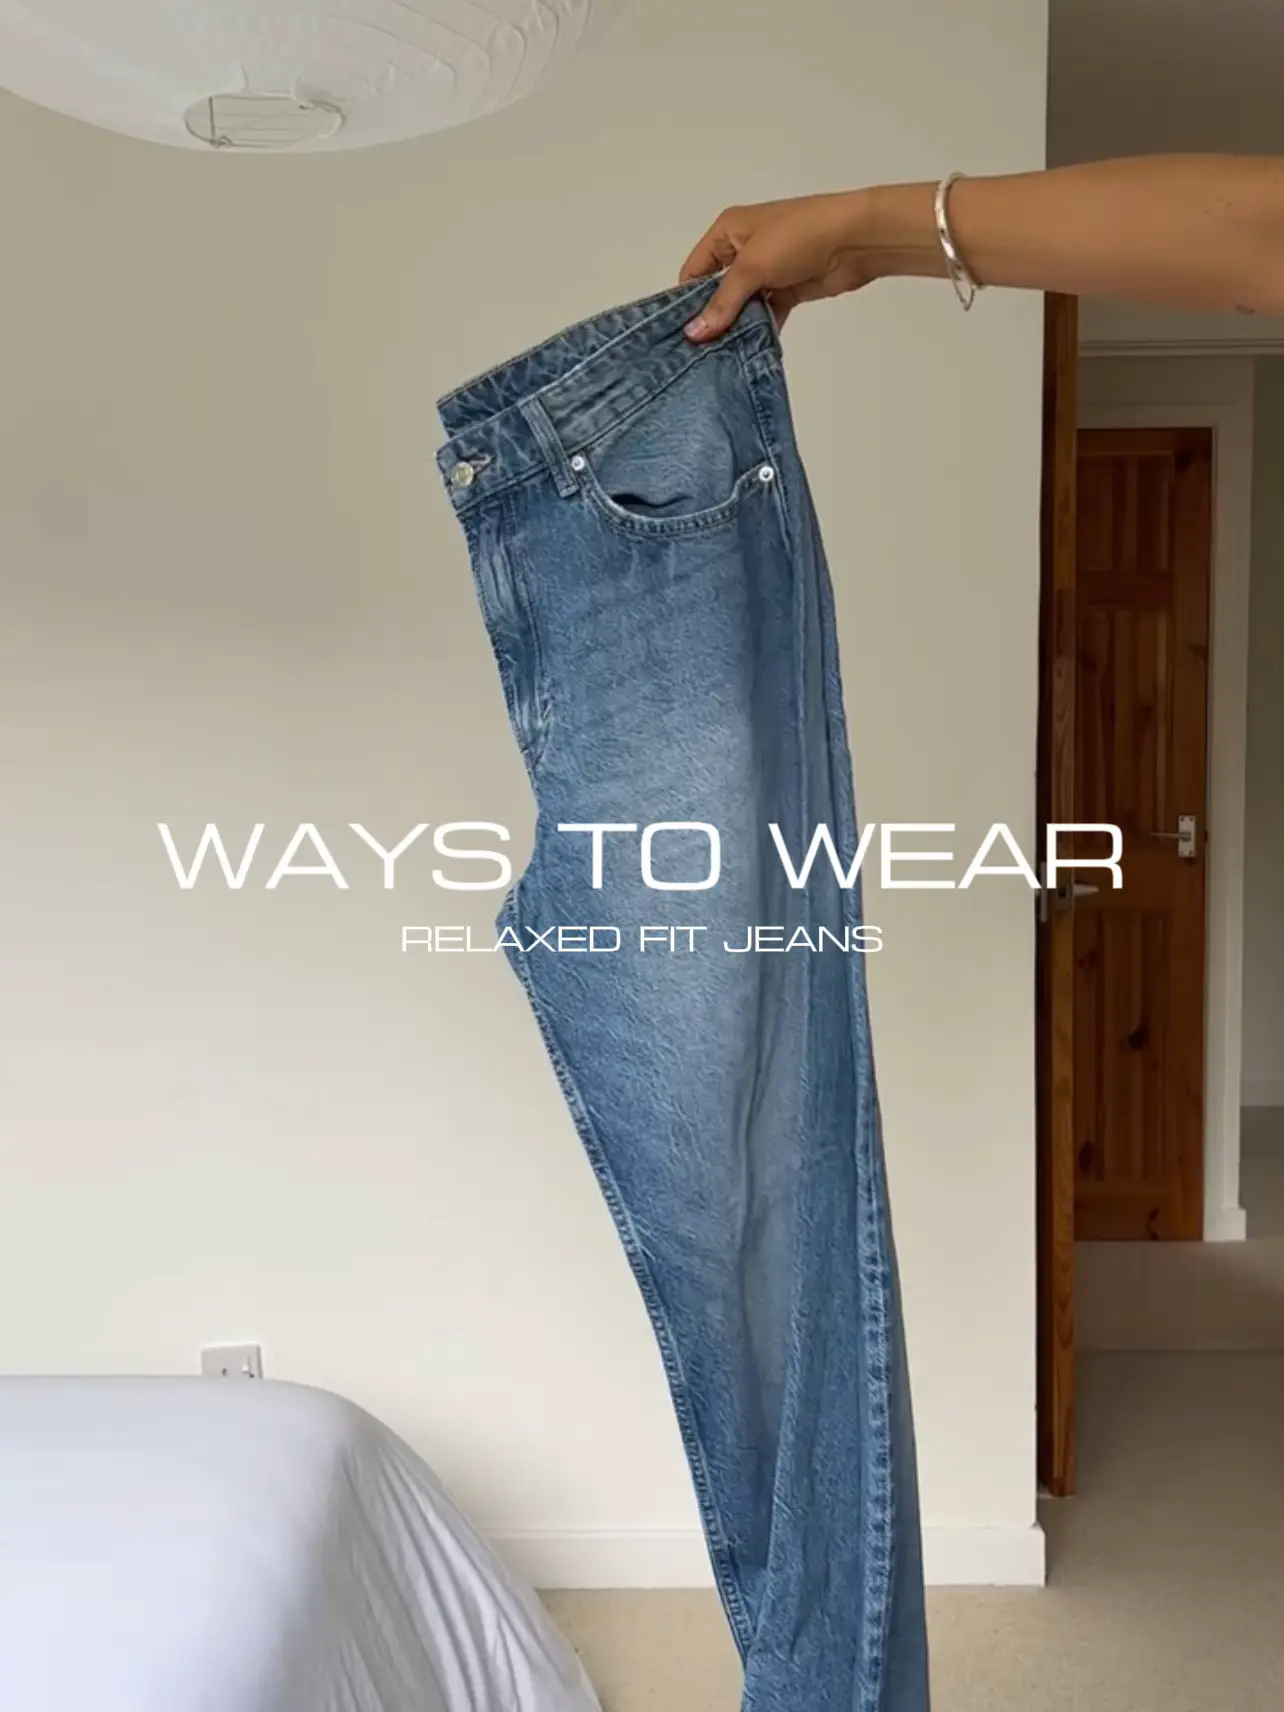 20 top How to Dress Up Relaxed Fit Jeans for Early Evening Meal